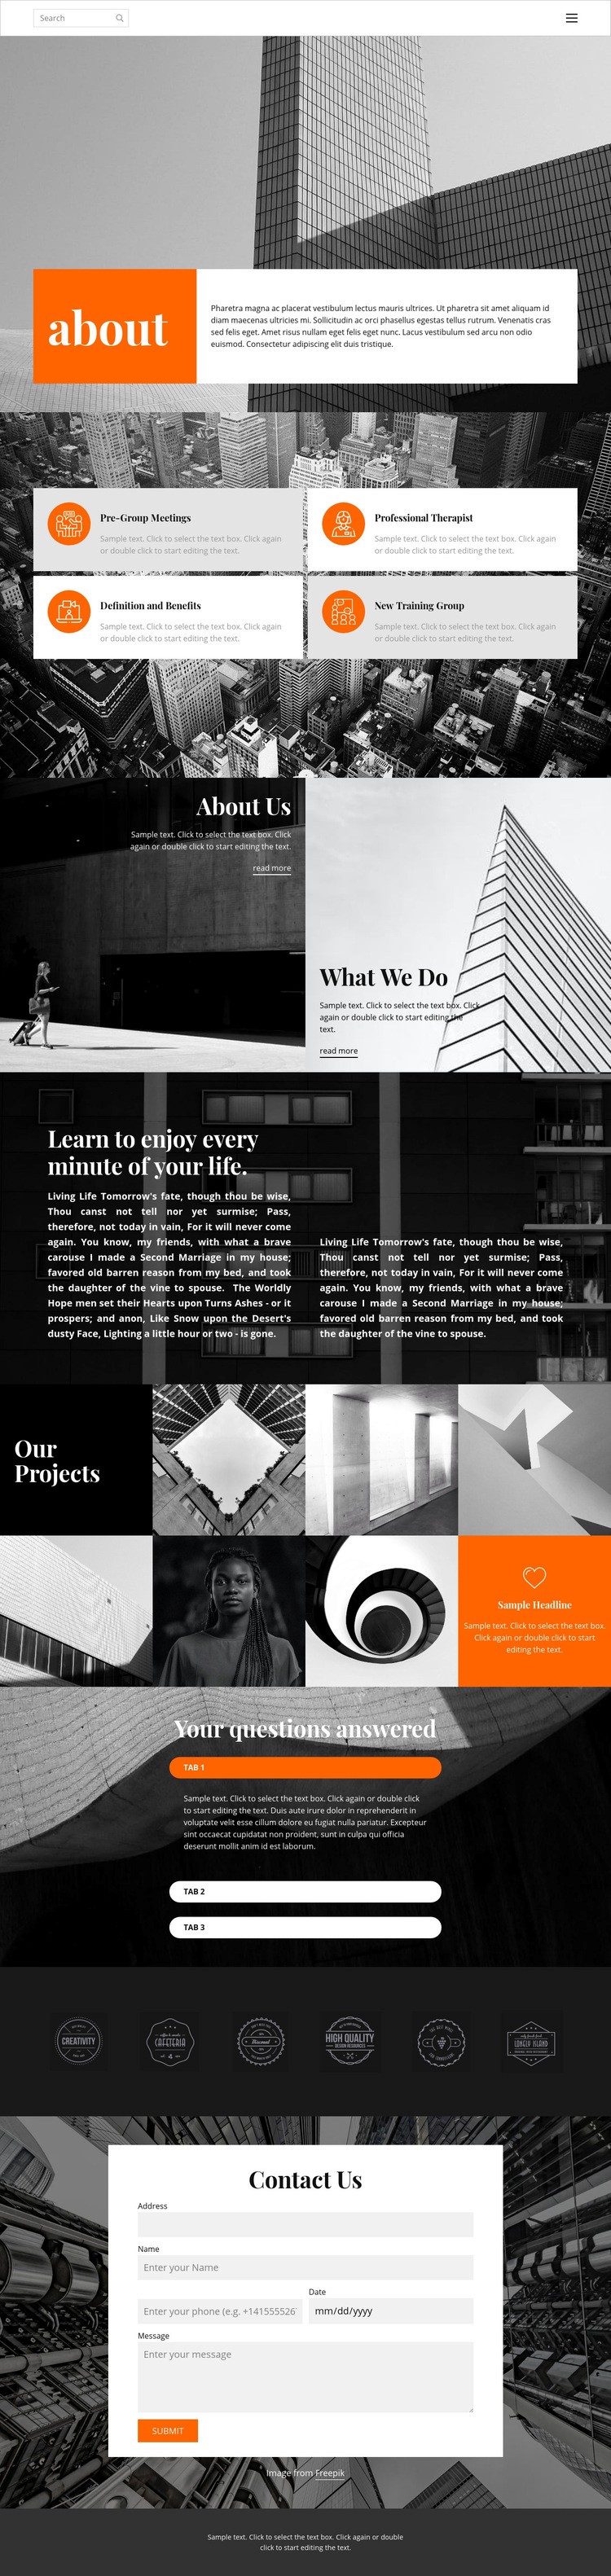 New projects studio Web Page Designer